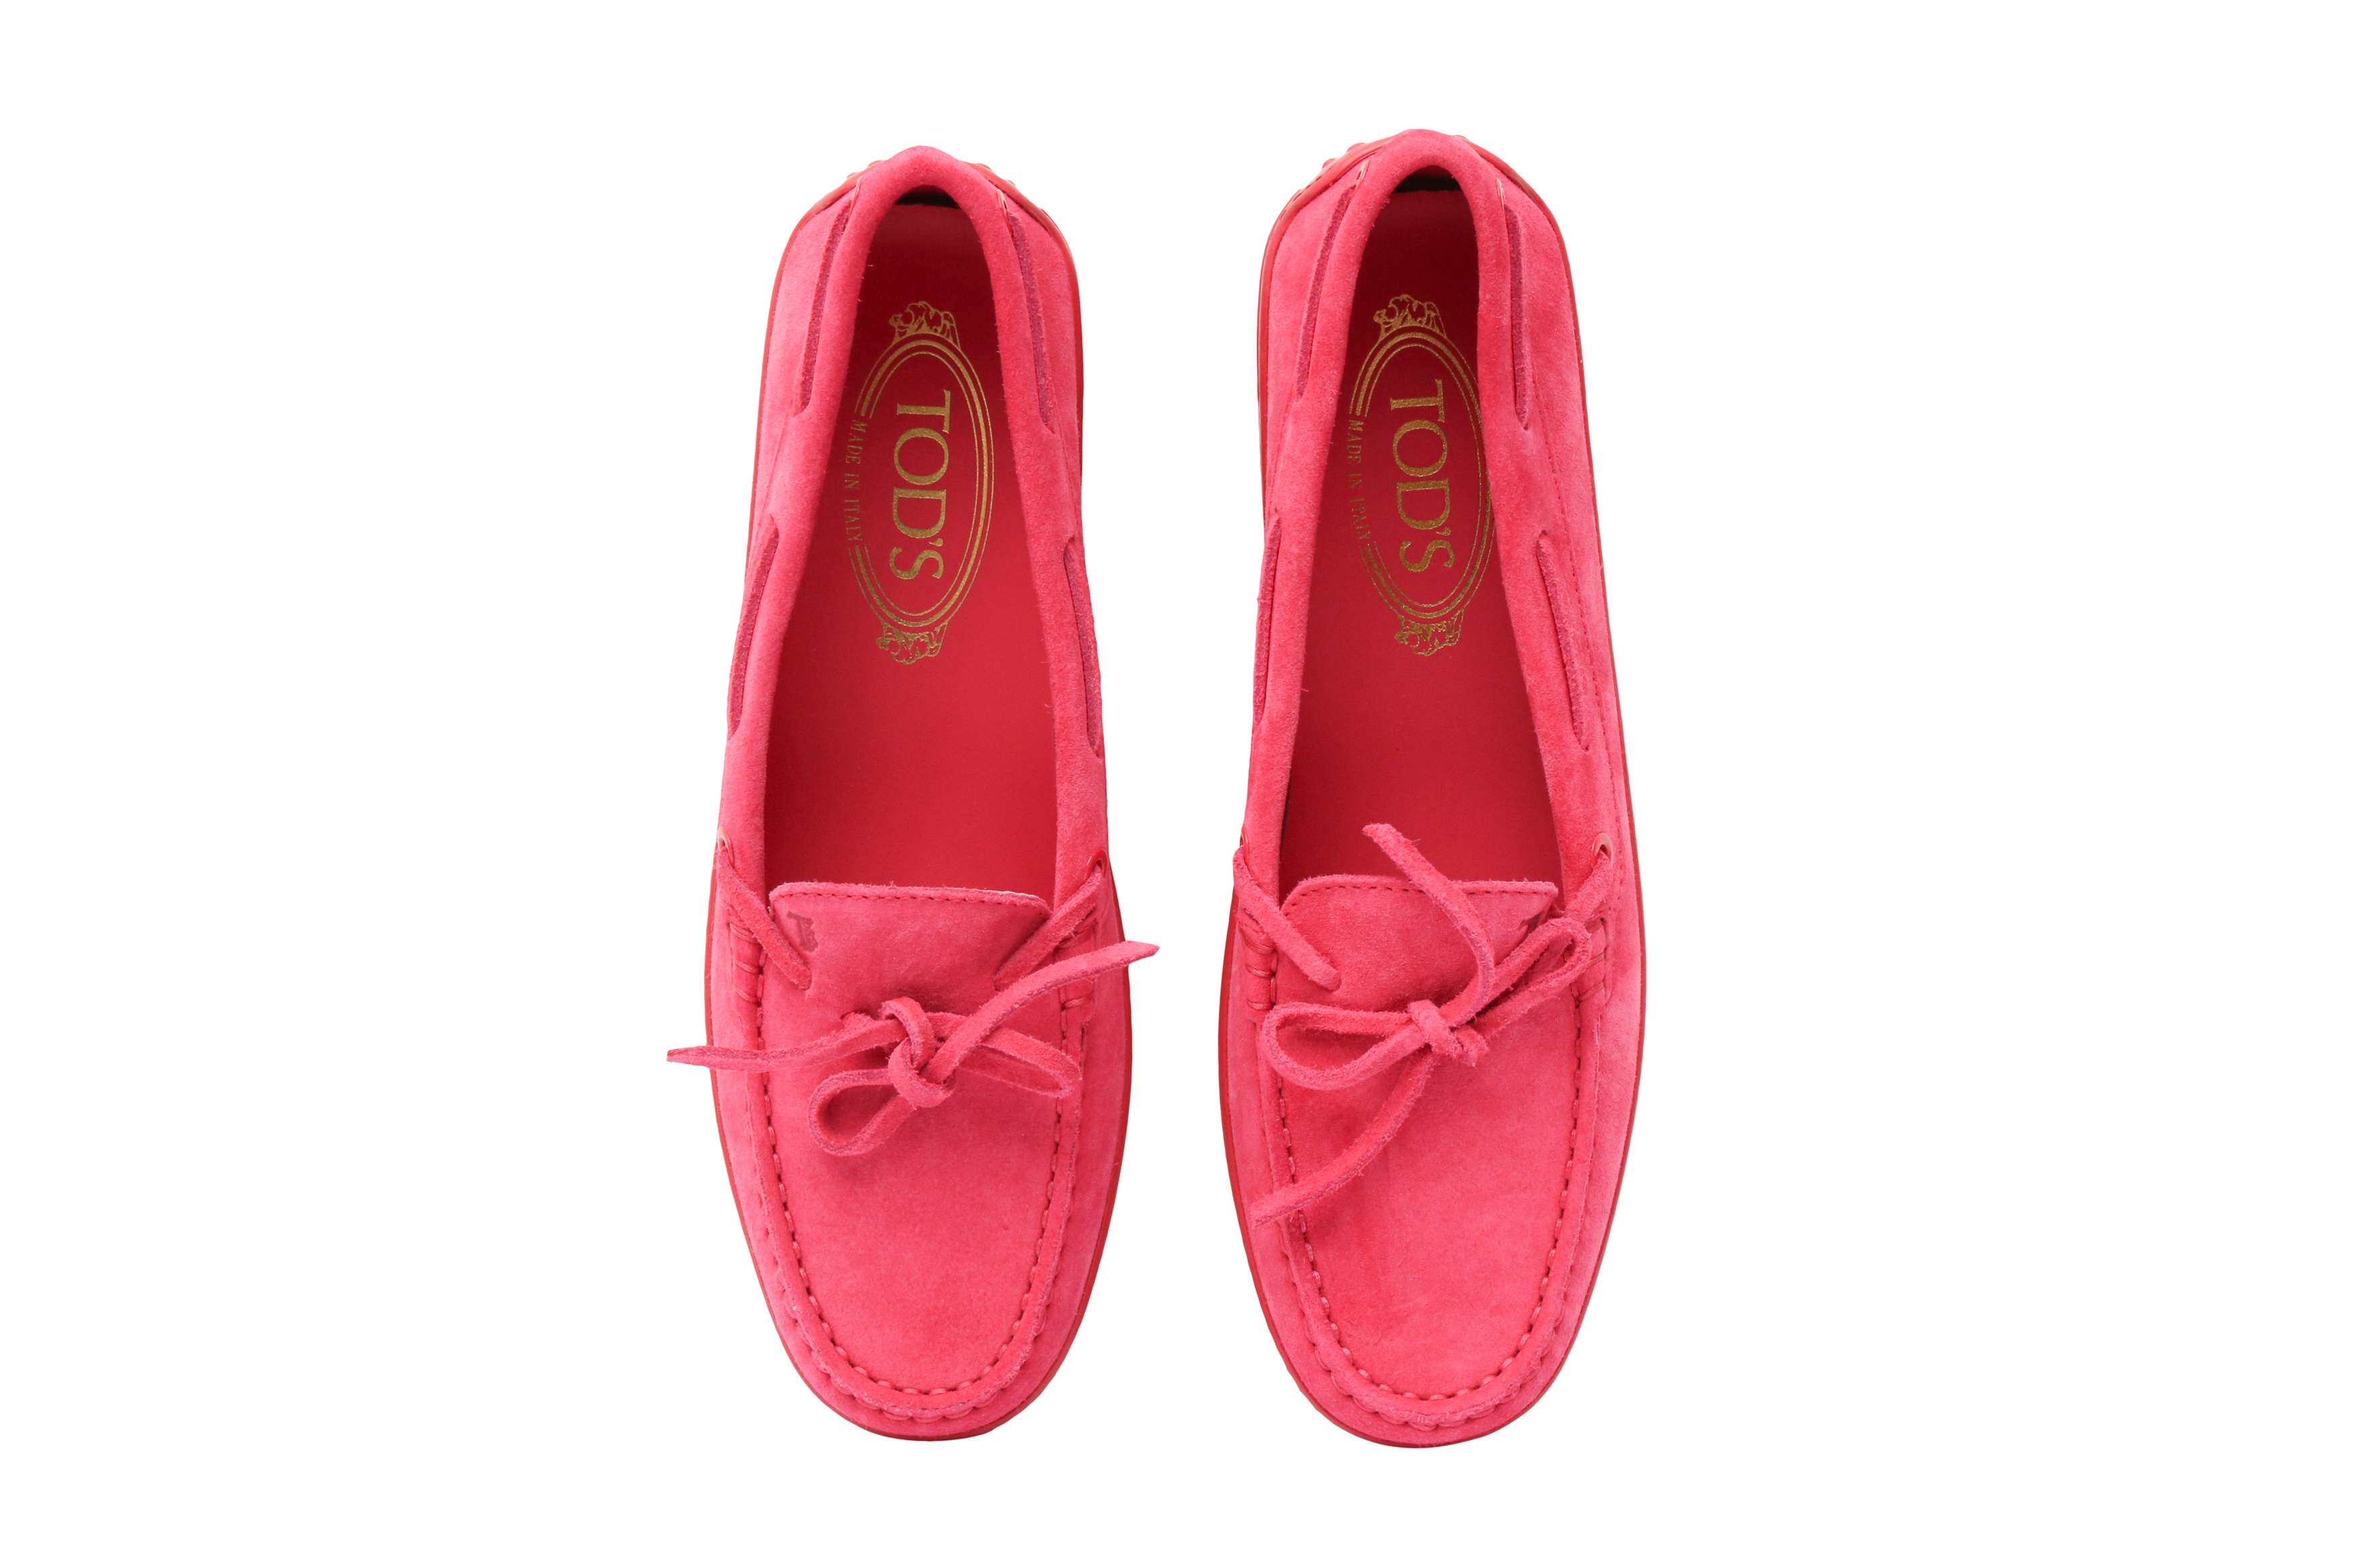 Tod's Fuschia Pink Driving Moccasin Loafer - Size 38 - Image 2 of 4